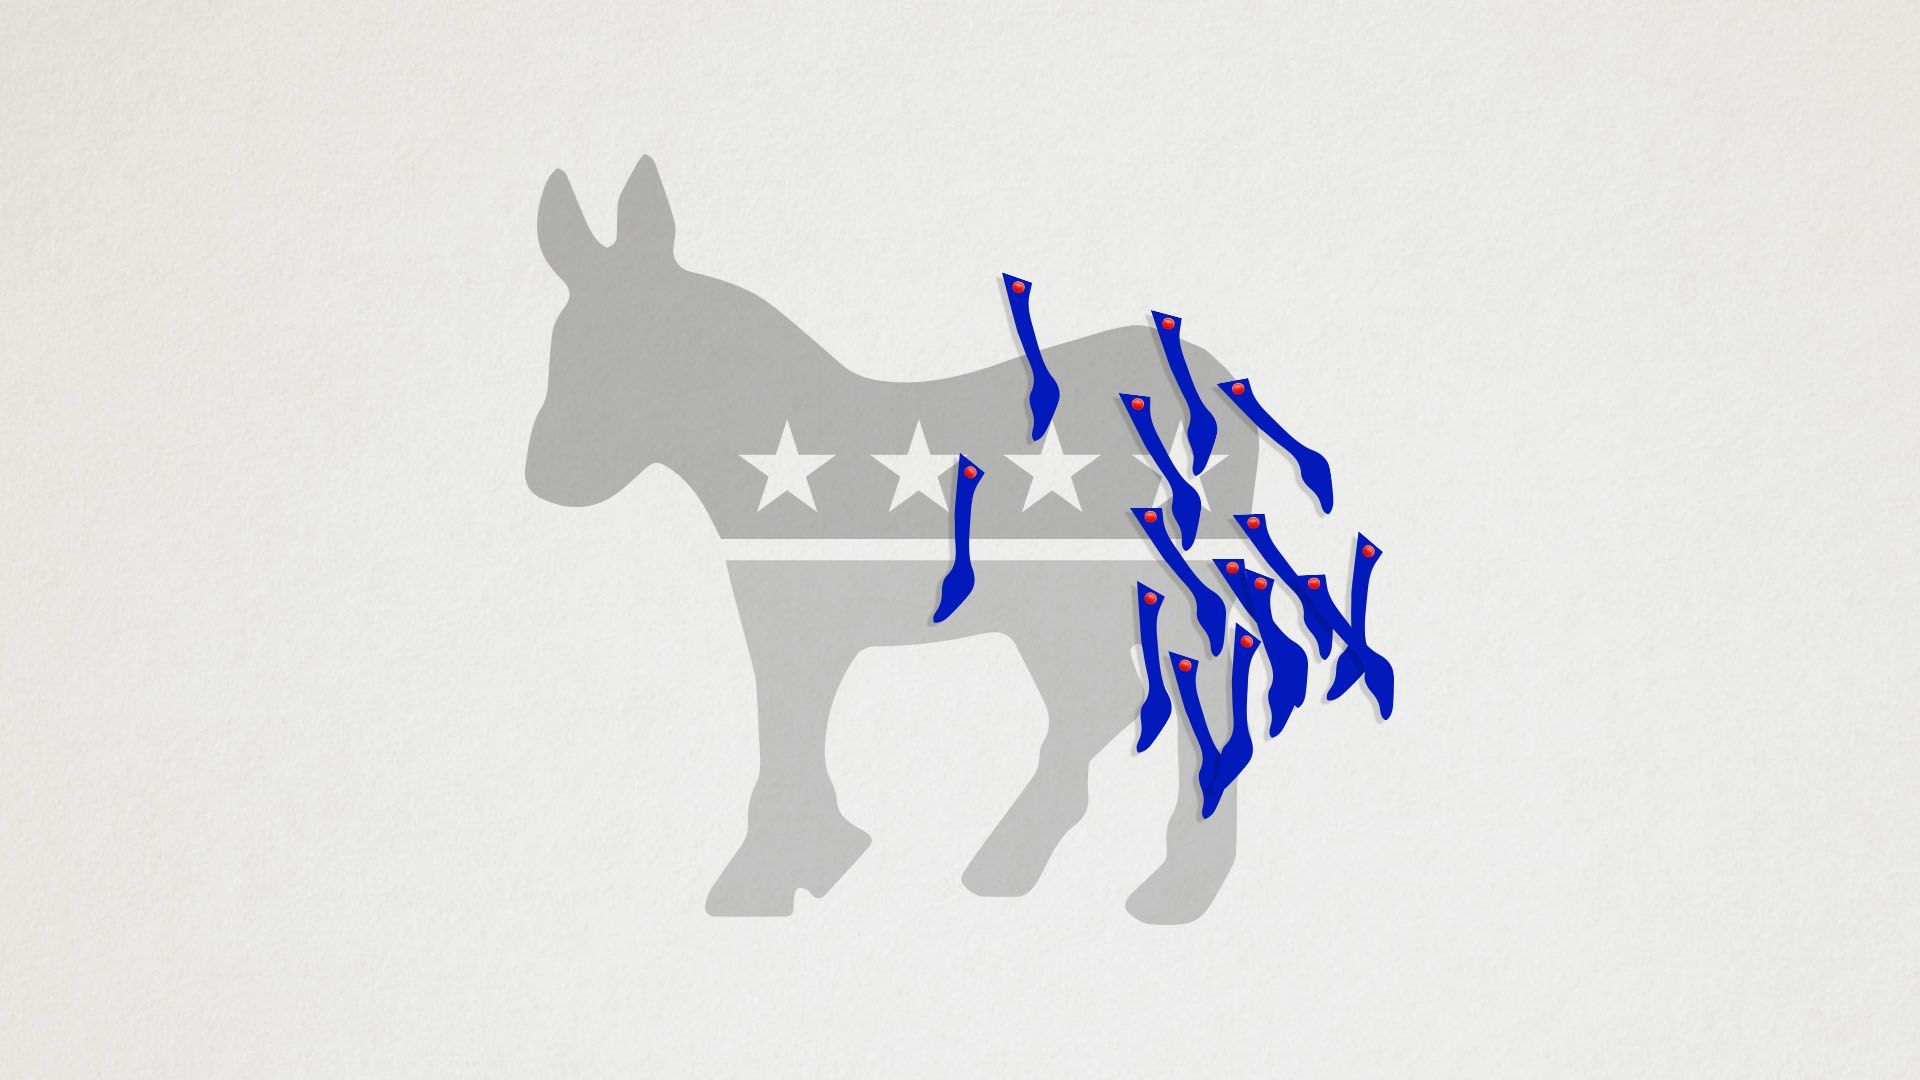 An illustration of a Democratic donkey with multiple tails pinned on the back.